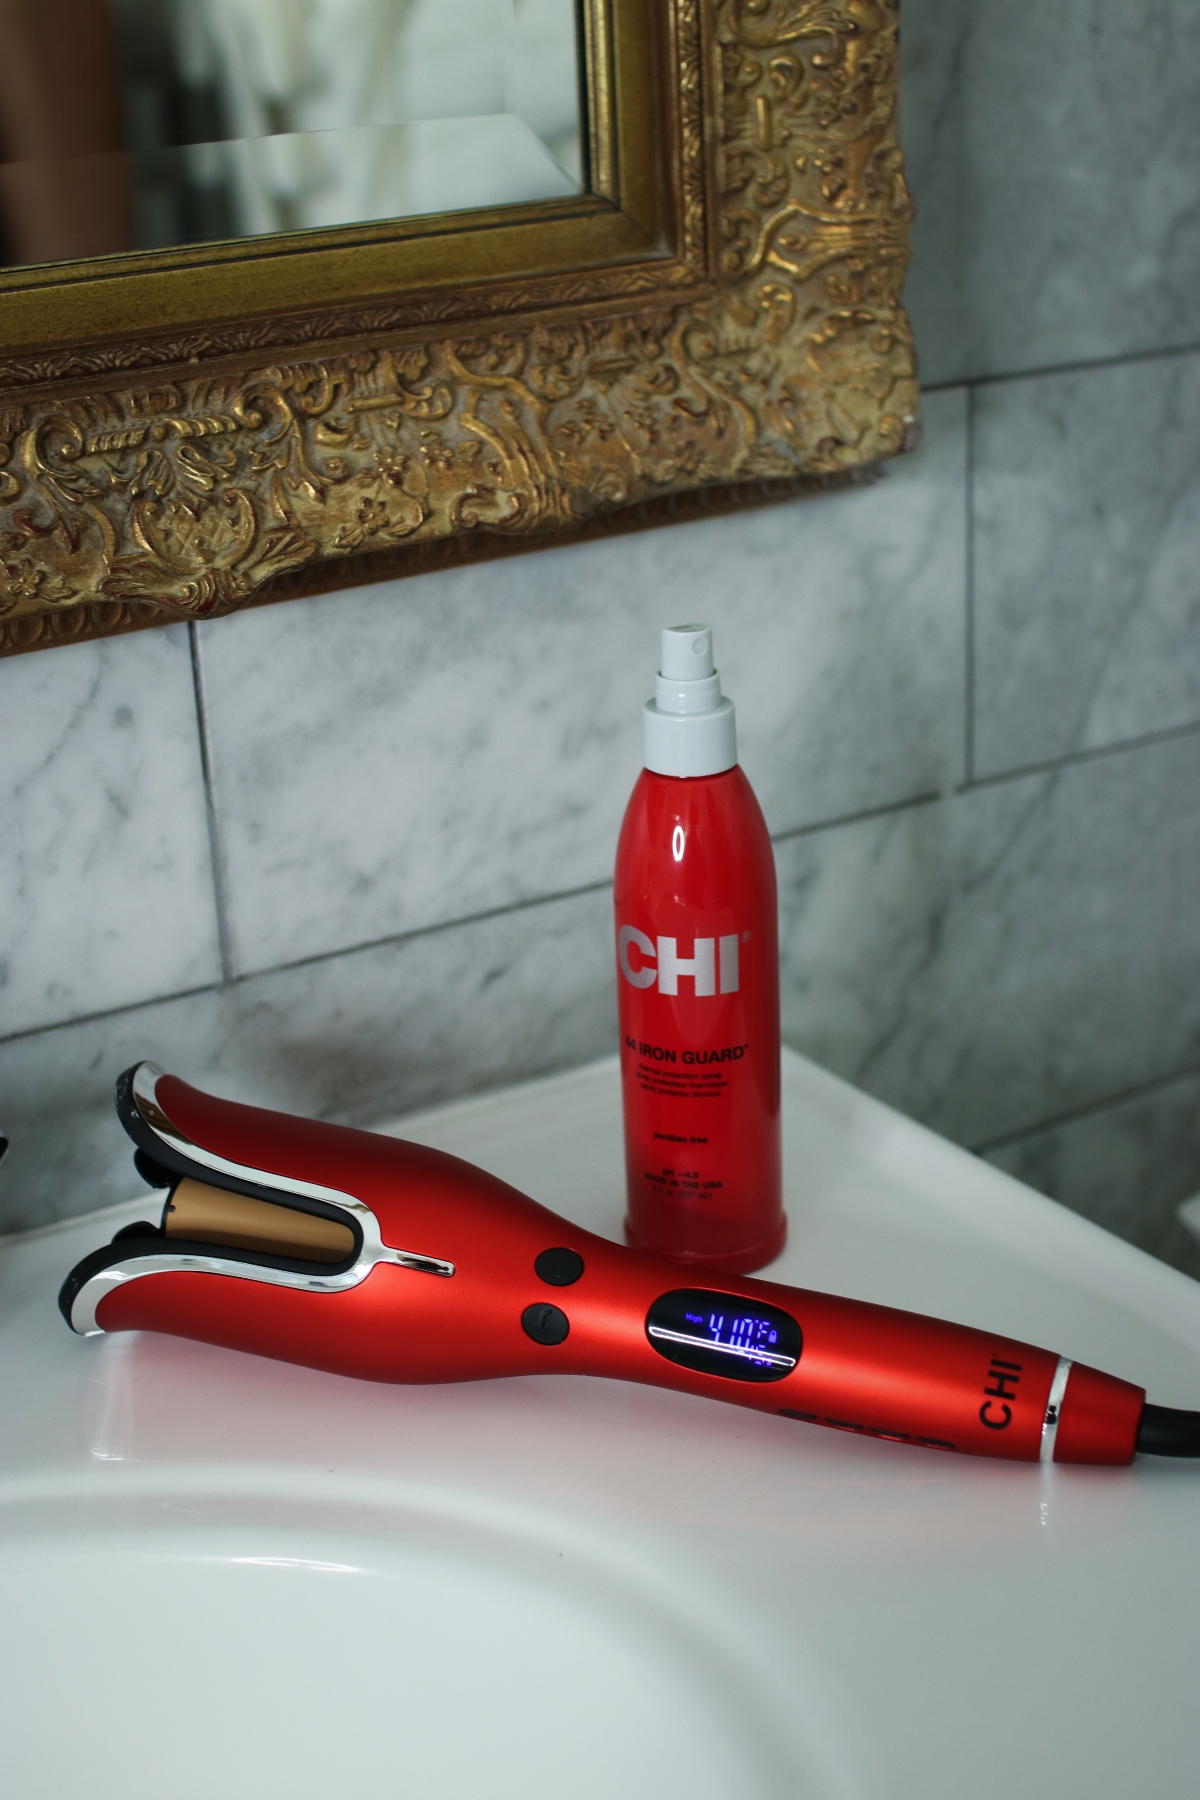 CHI Spin and Curl Curling Iron and CHI 44 Iron Guard Thermal Protection Spray